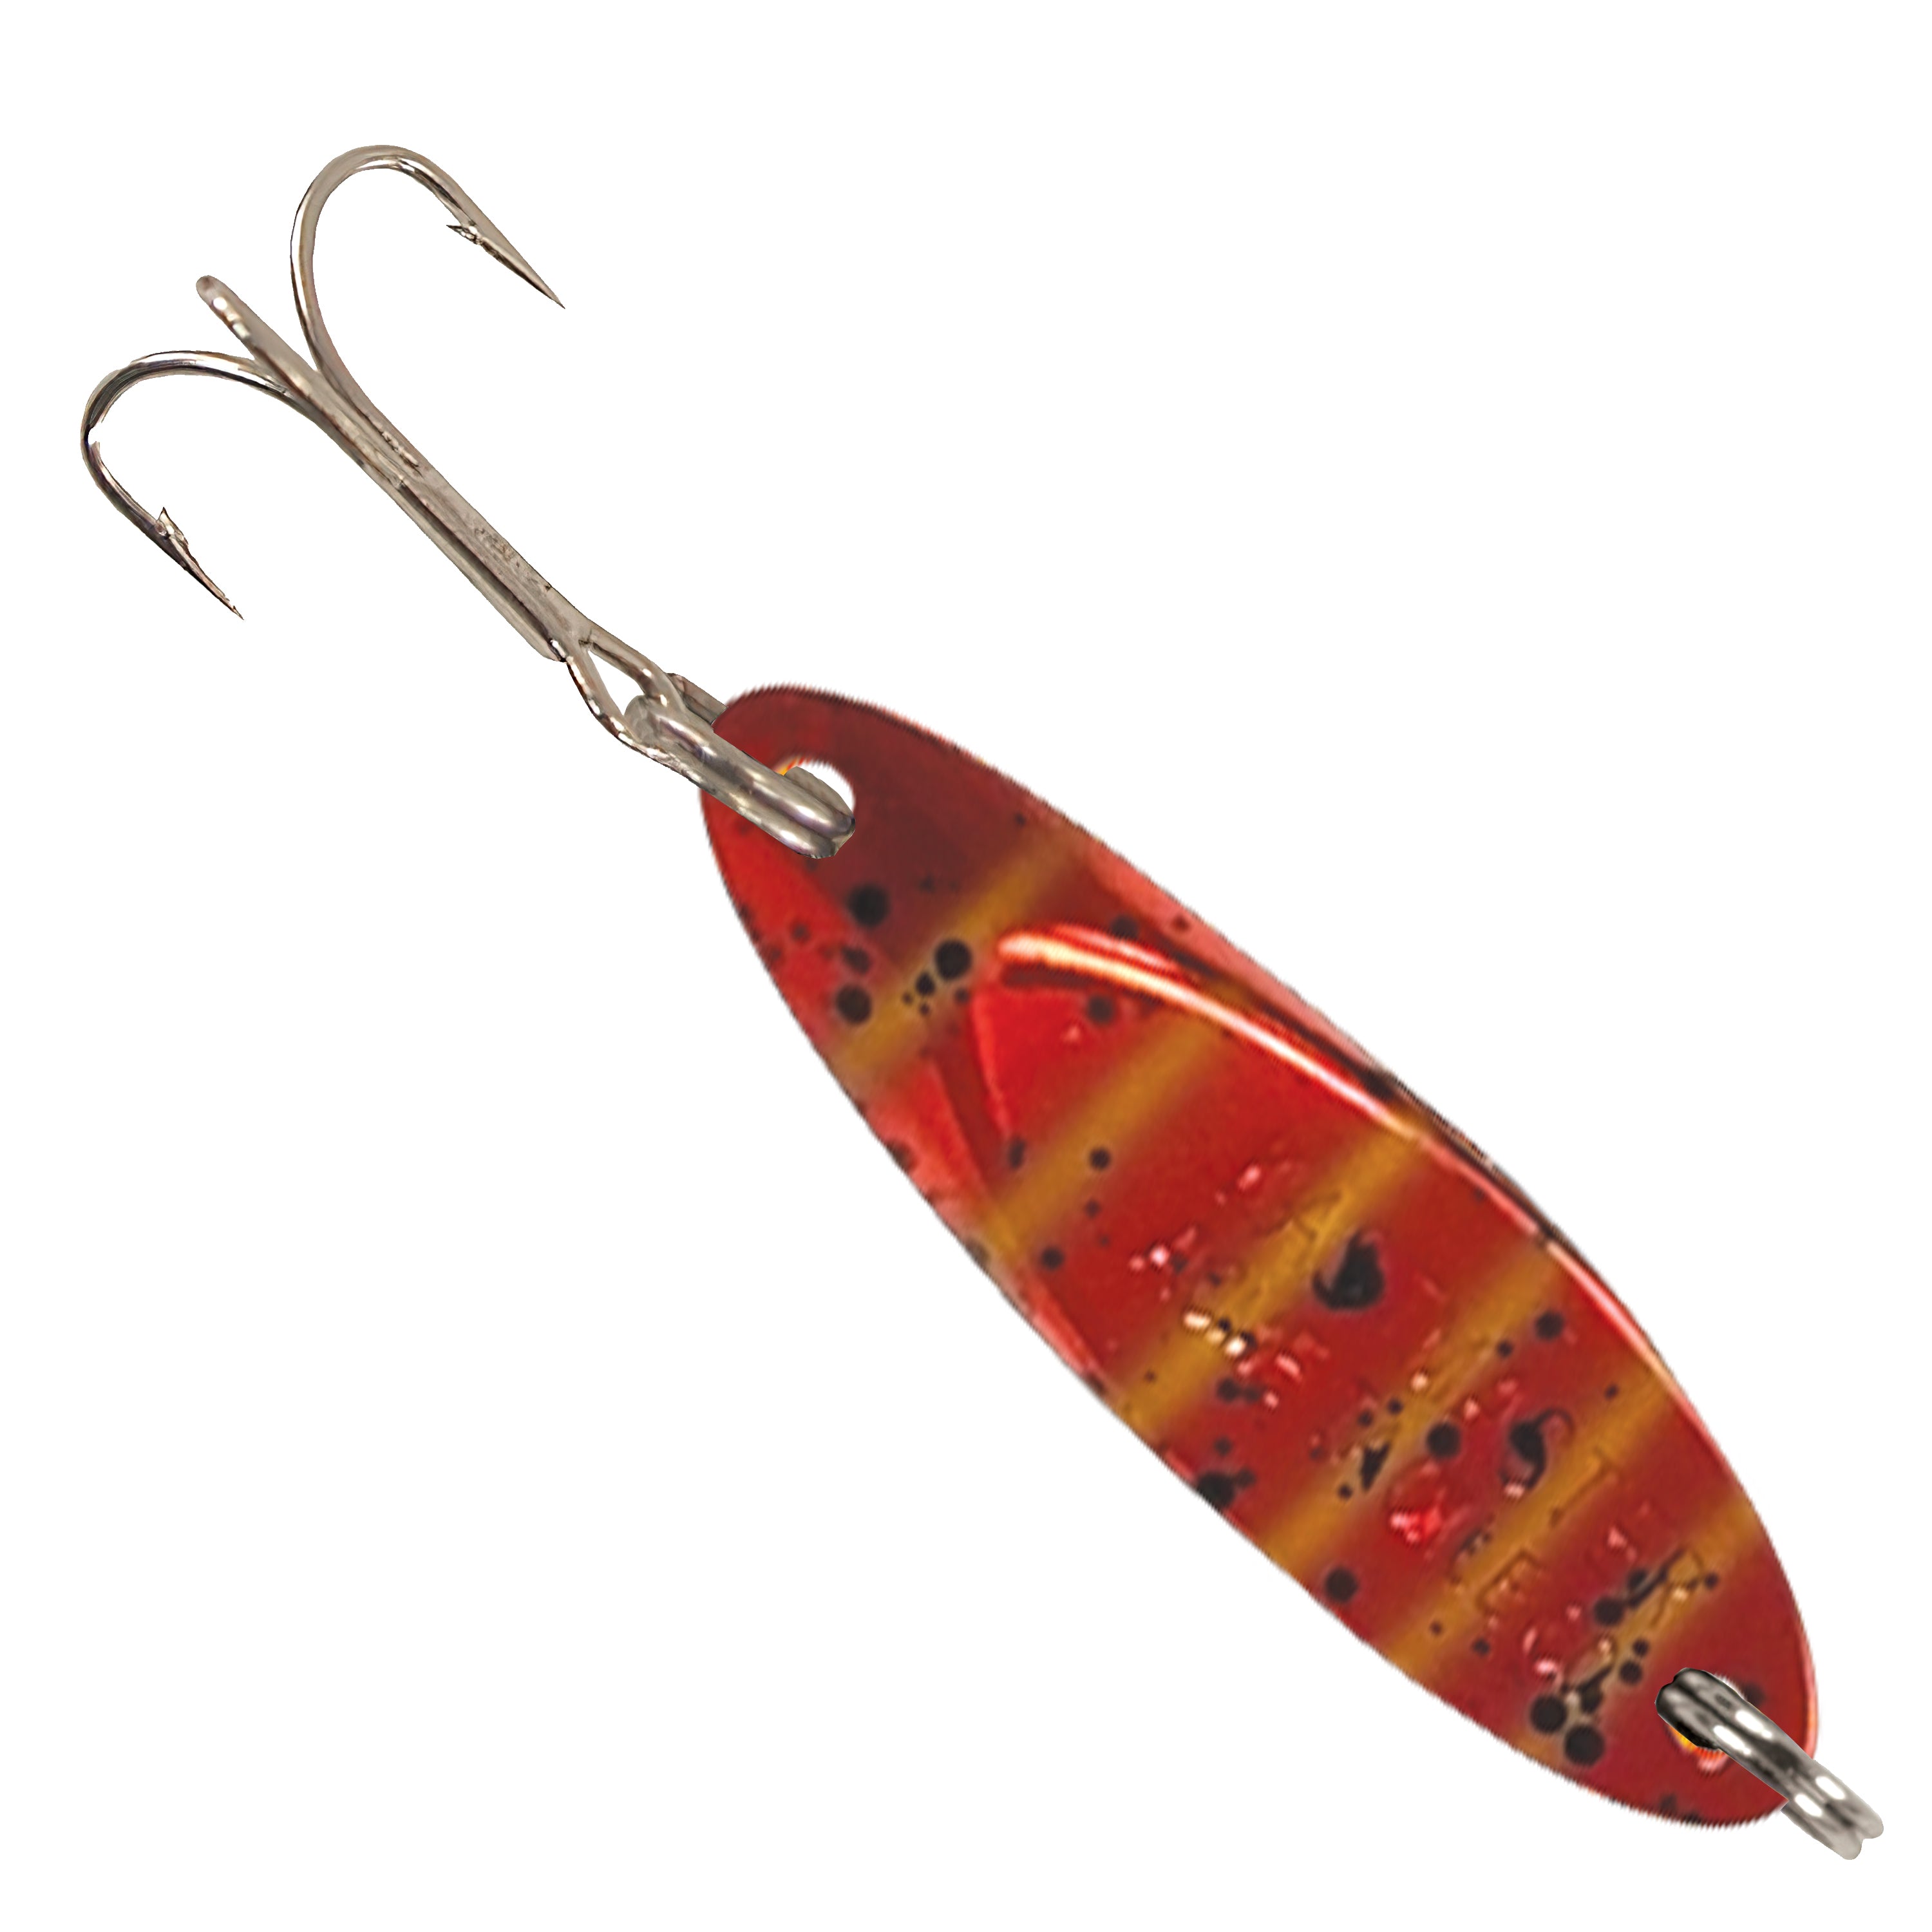 Acme Tackle Kastmaster Fishing Lure Spoon Watermelon 1/8 oz. 